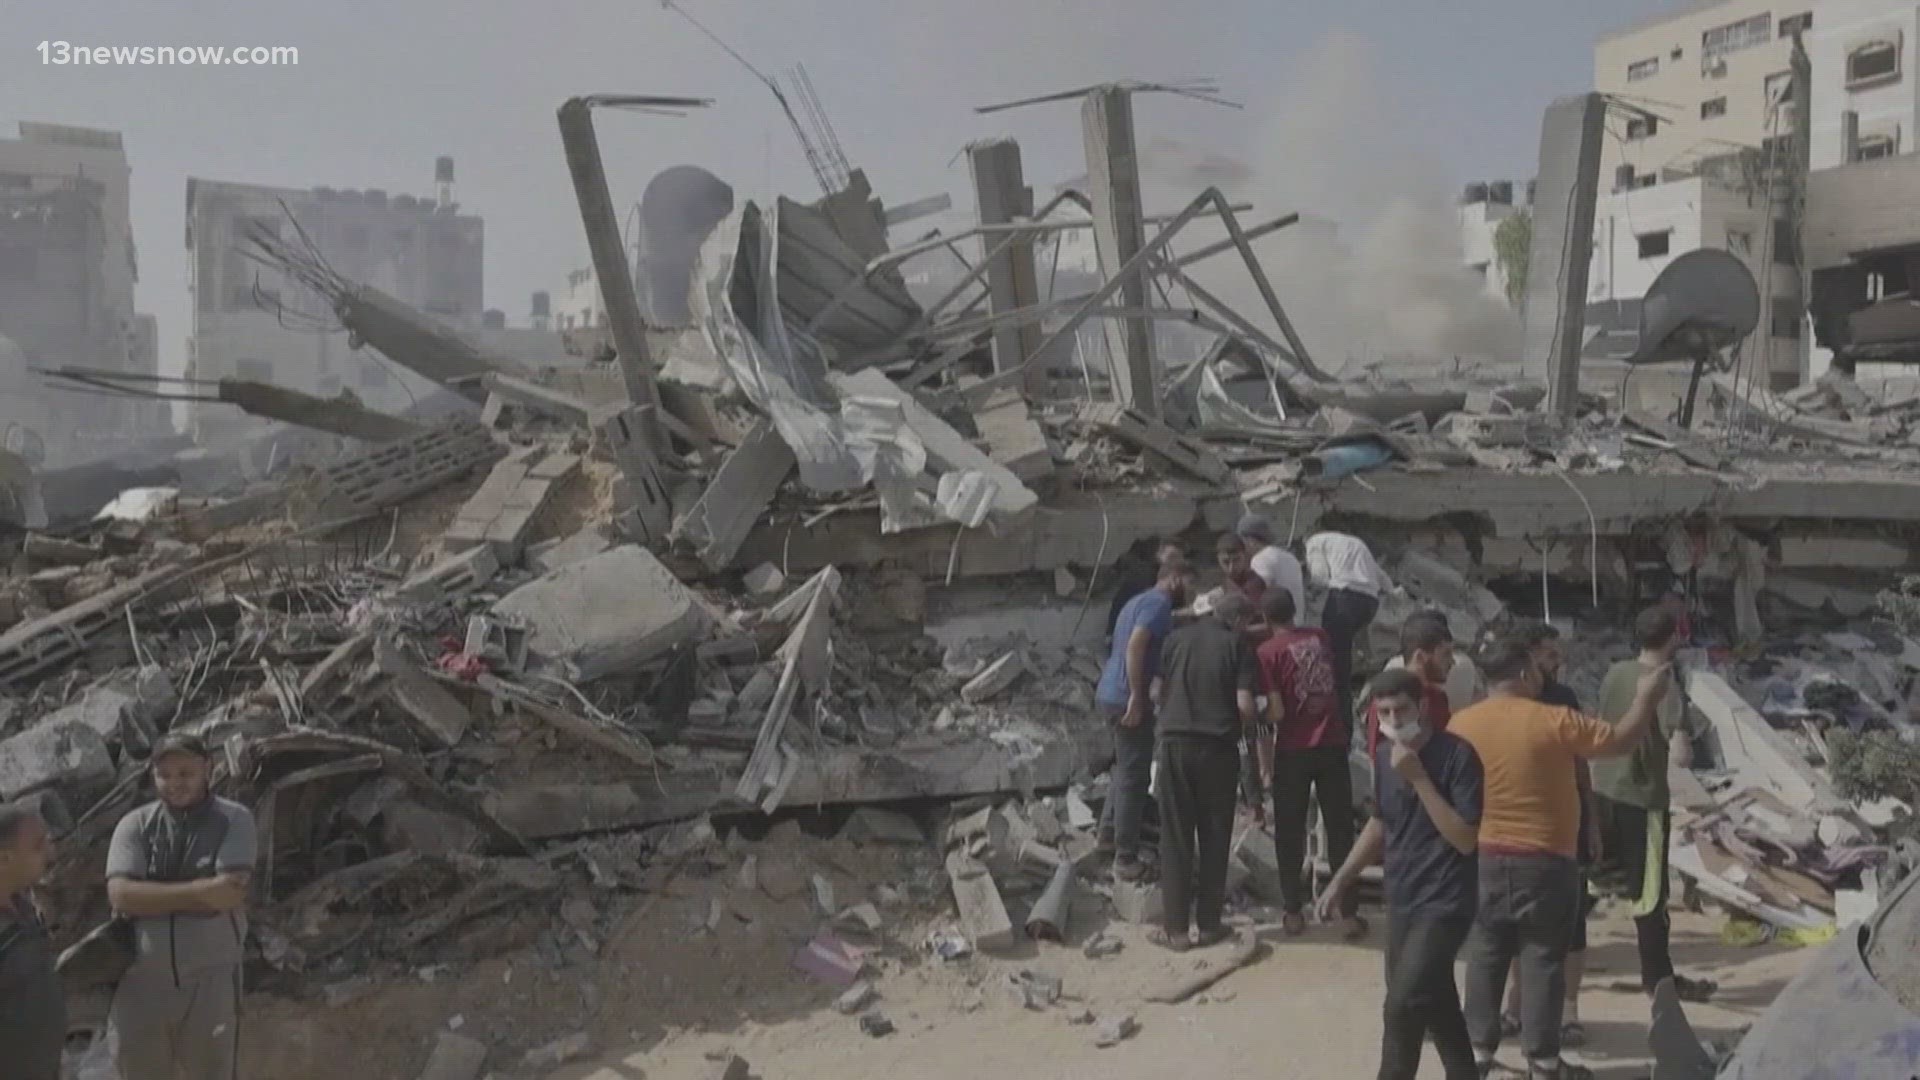 Israel is rejecting calls for a cease-fire as it steps up air and ground strikes on Hamas militant targets in Gaza.